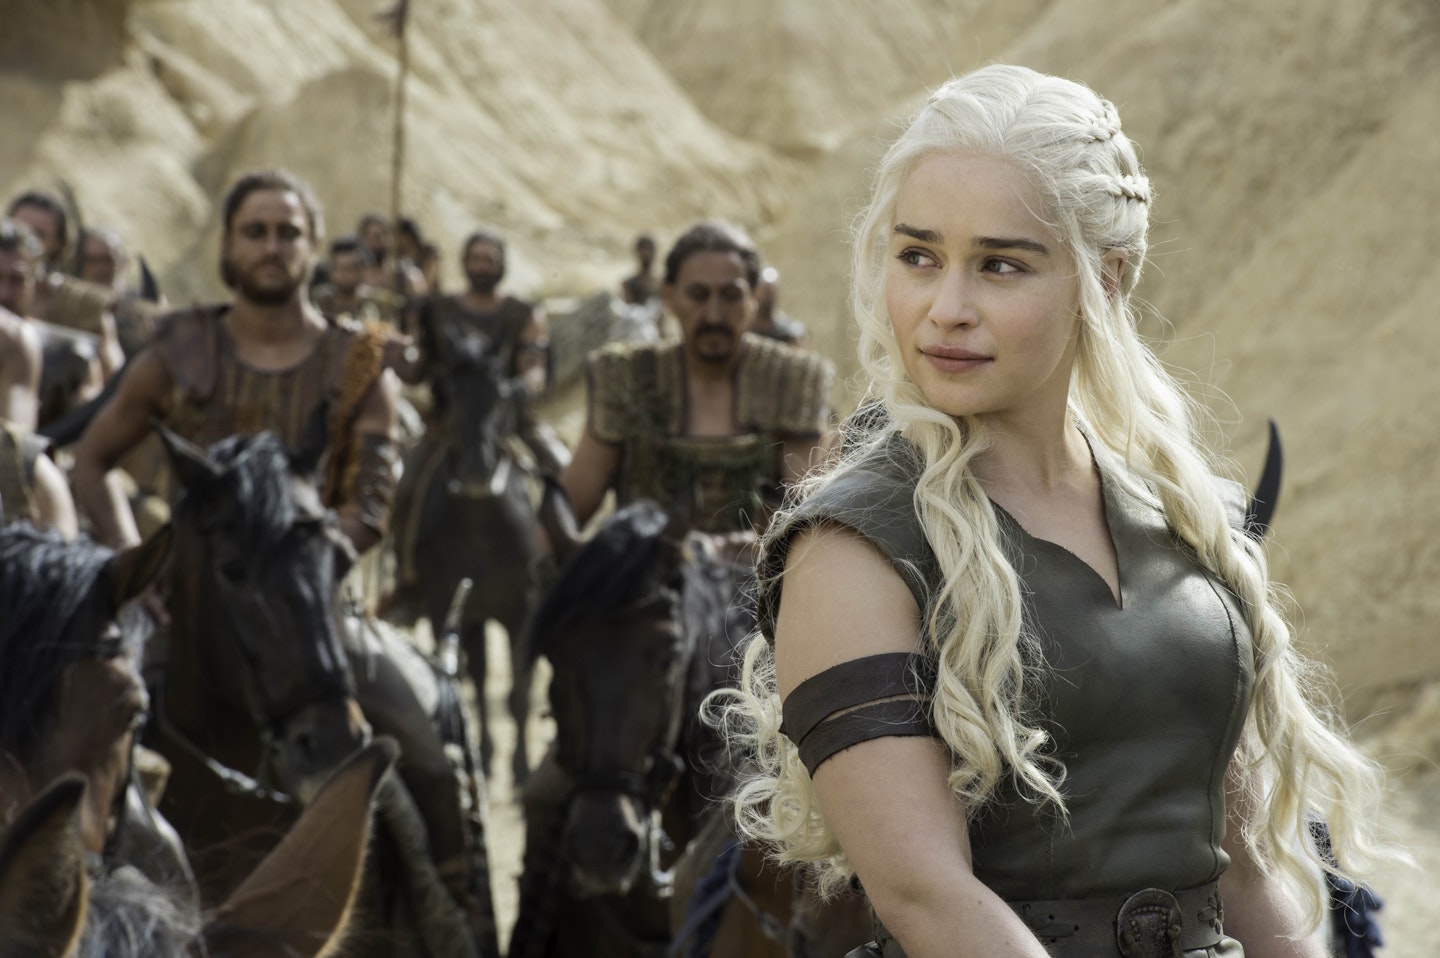 Game of Thrones cast looks back on the show's start, finish and legacy